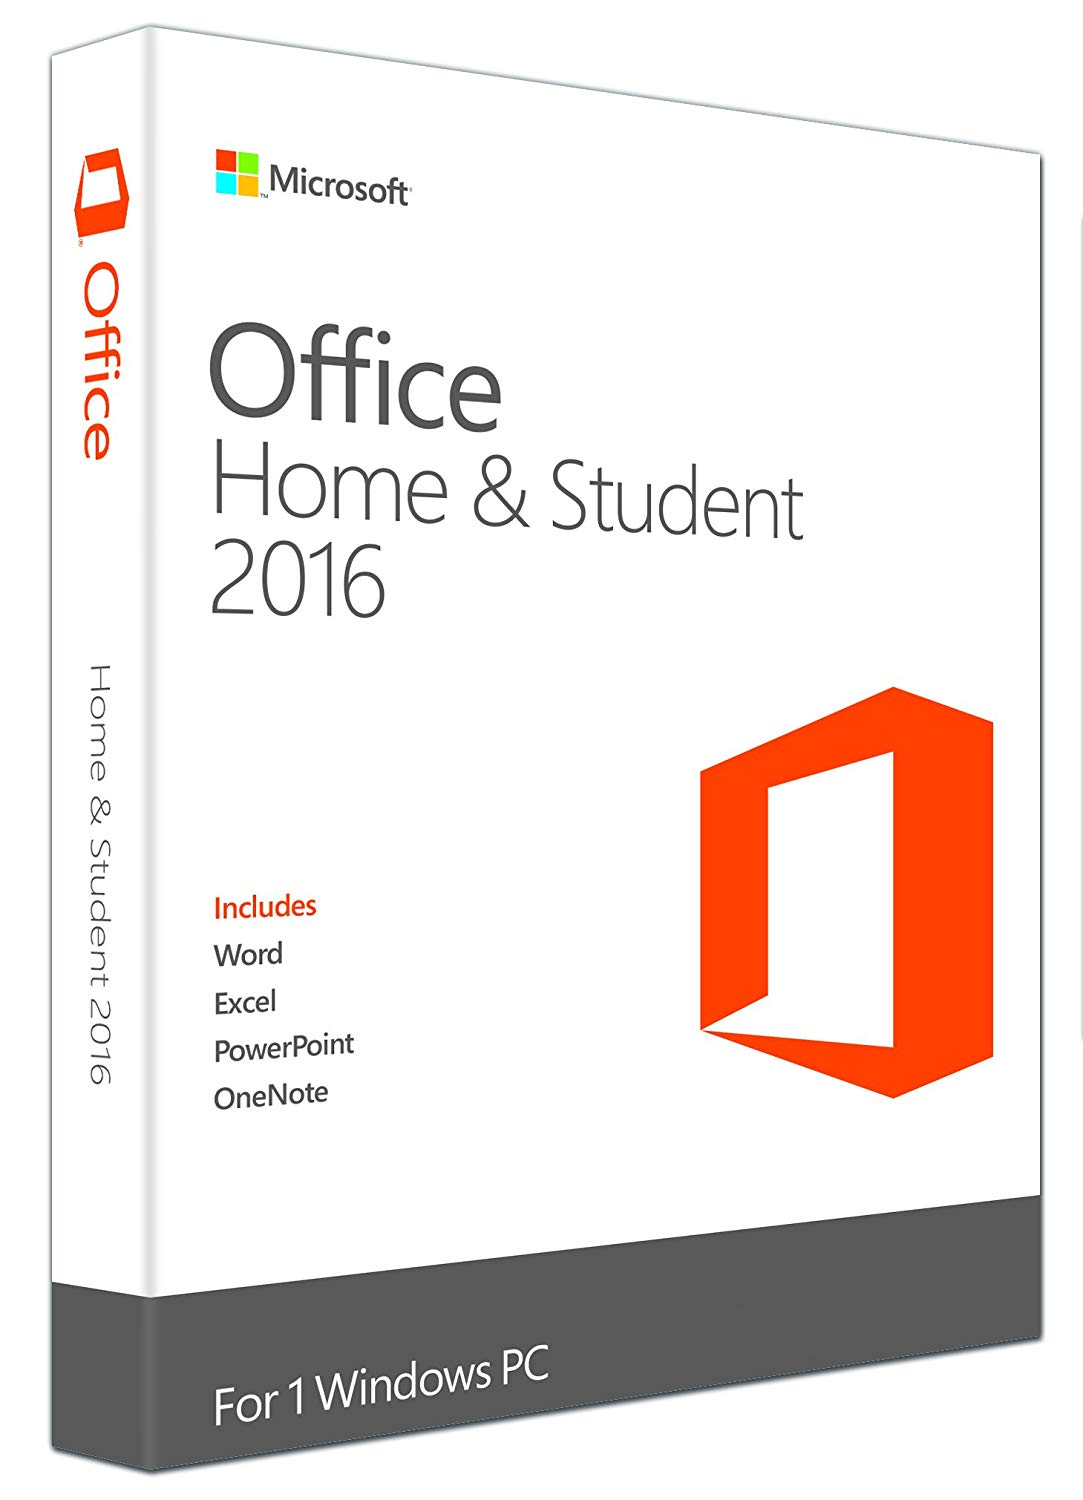 buy microsoft office one time purchase